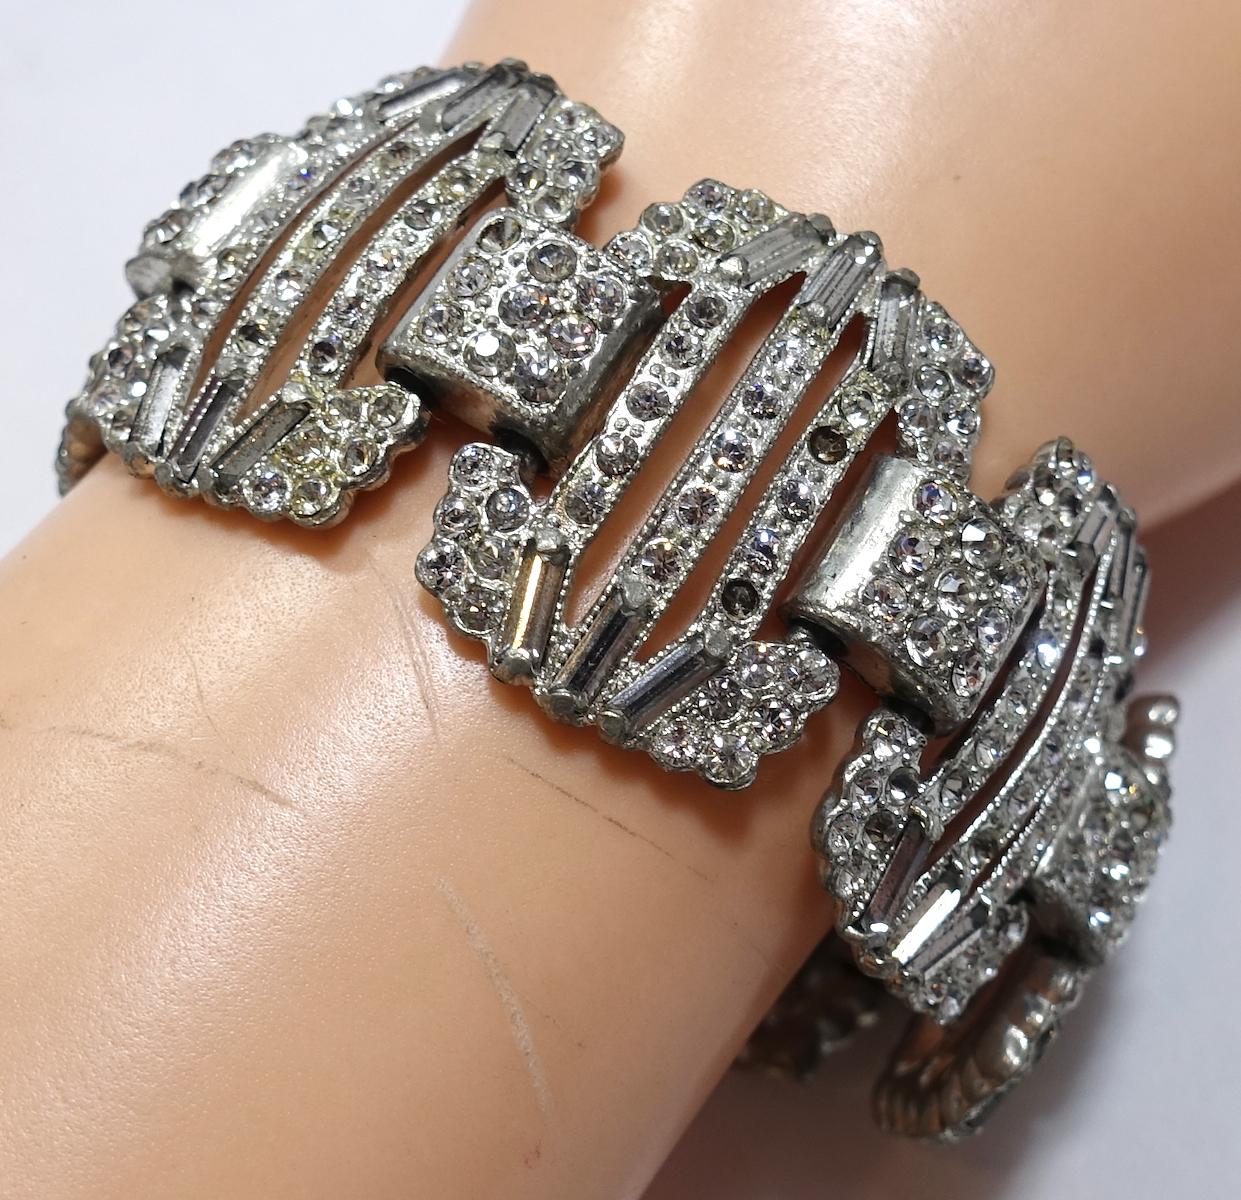 This vintage Art Deco 1930s bracelet features clear rhinestones in the old pot metal setting.  This bracelet measures 7-1/2” x 1-1/8” with a slide in closure and is in excellent condition. All the stones are clear, when photographed to show details,